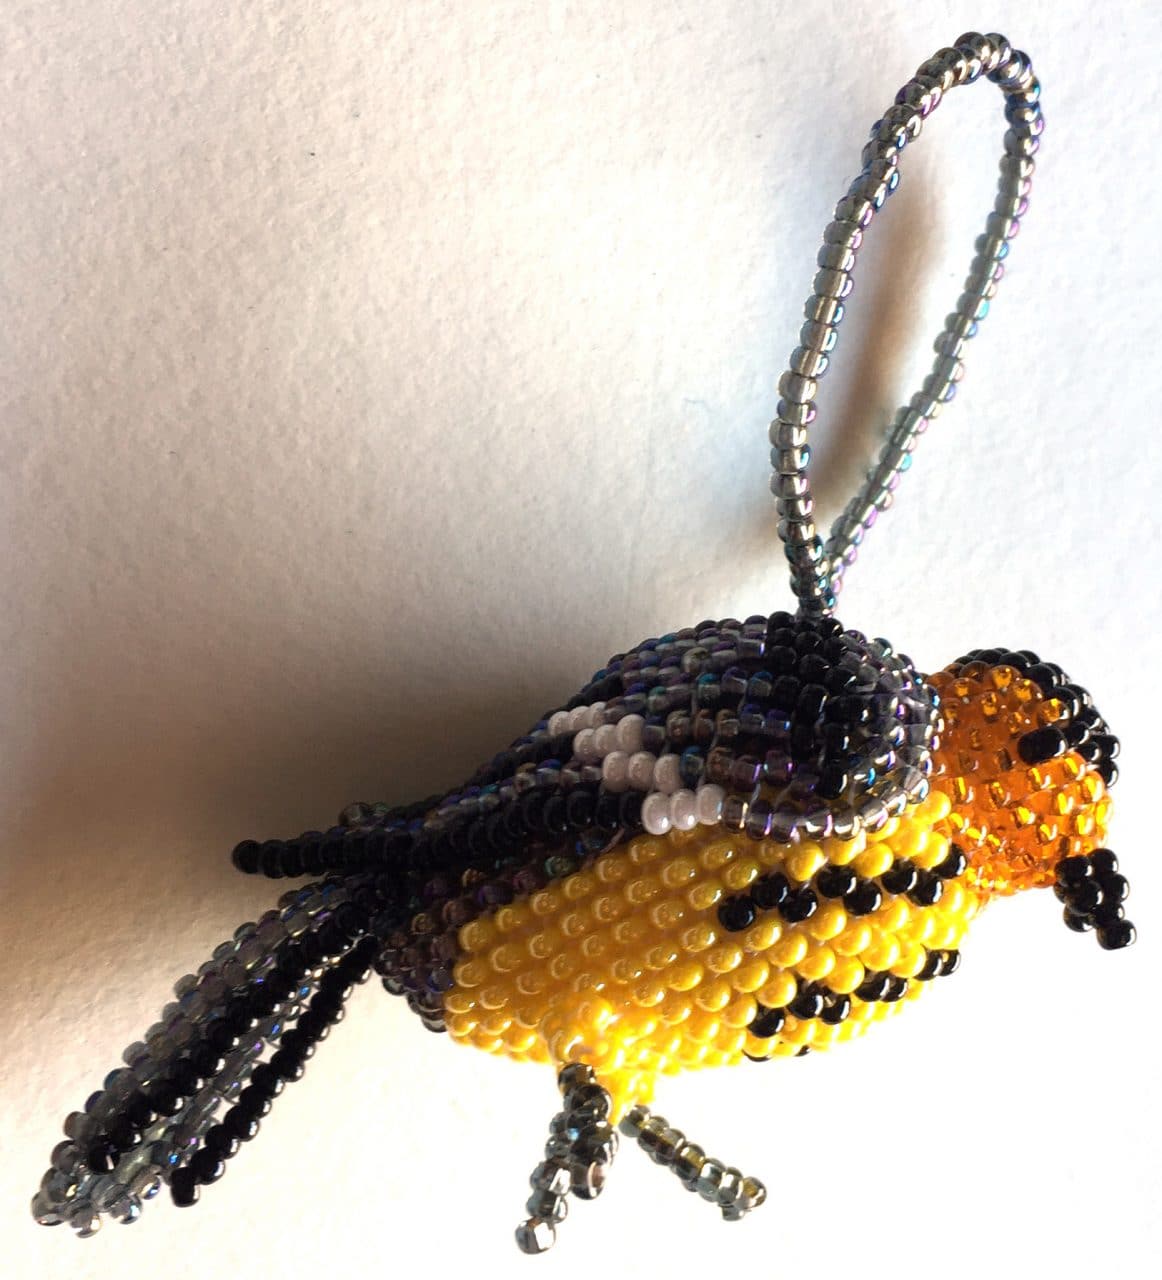 Cape May Warbler Beaded Bird Ornament